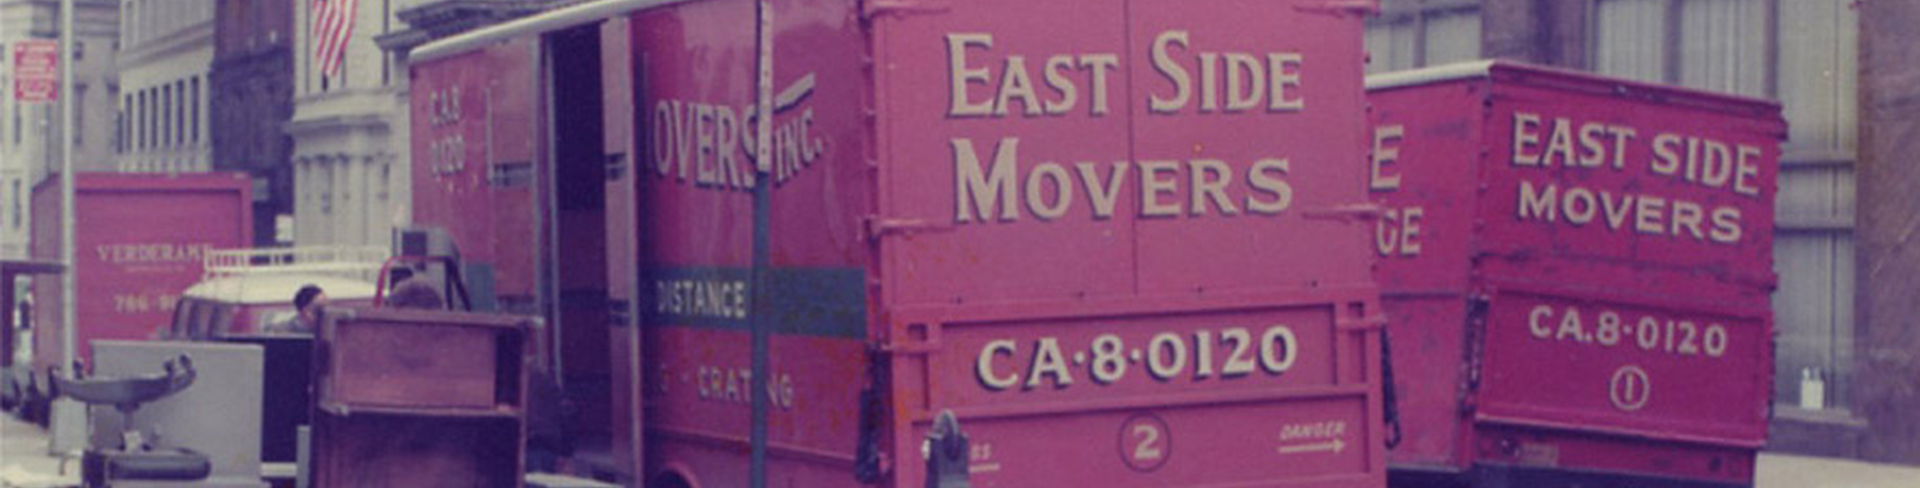 East Side Movers